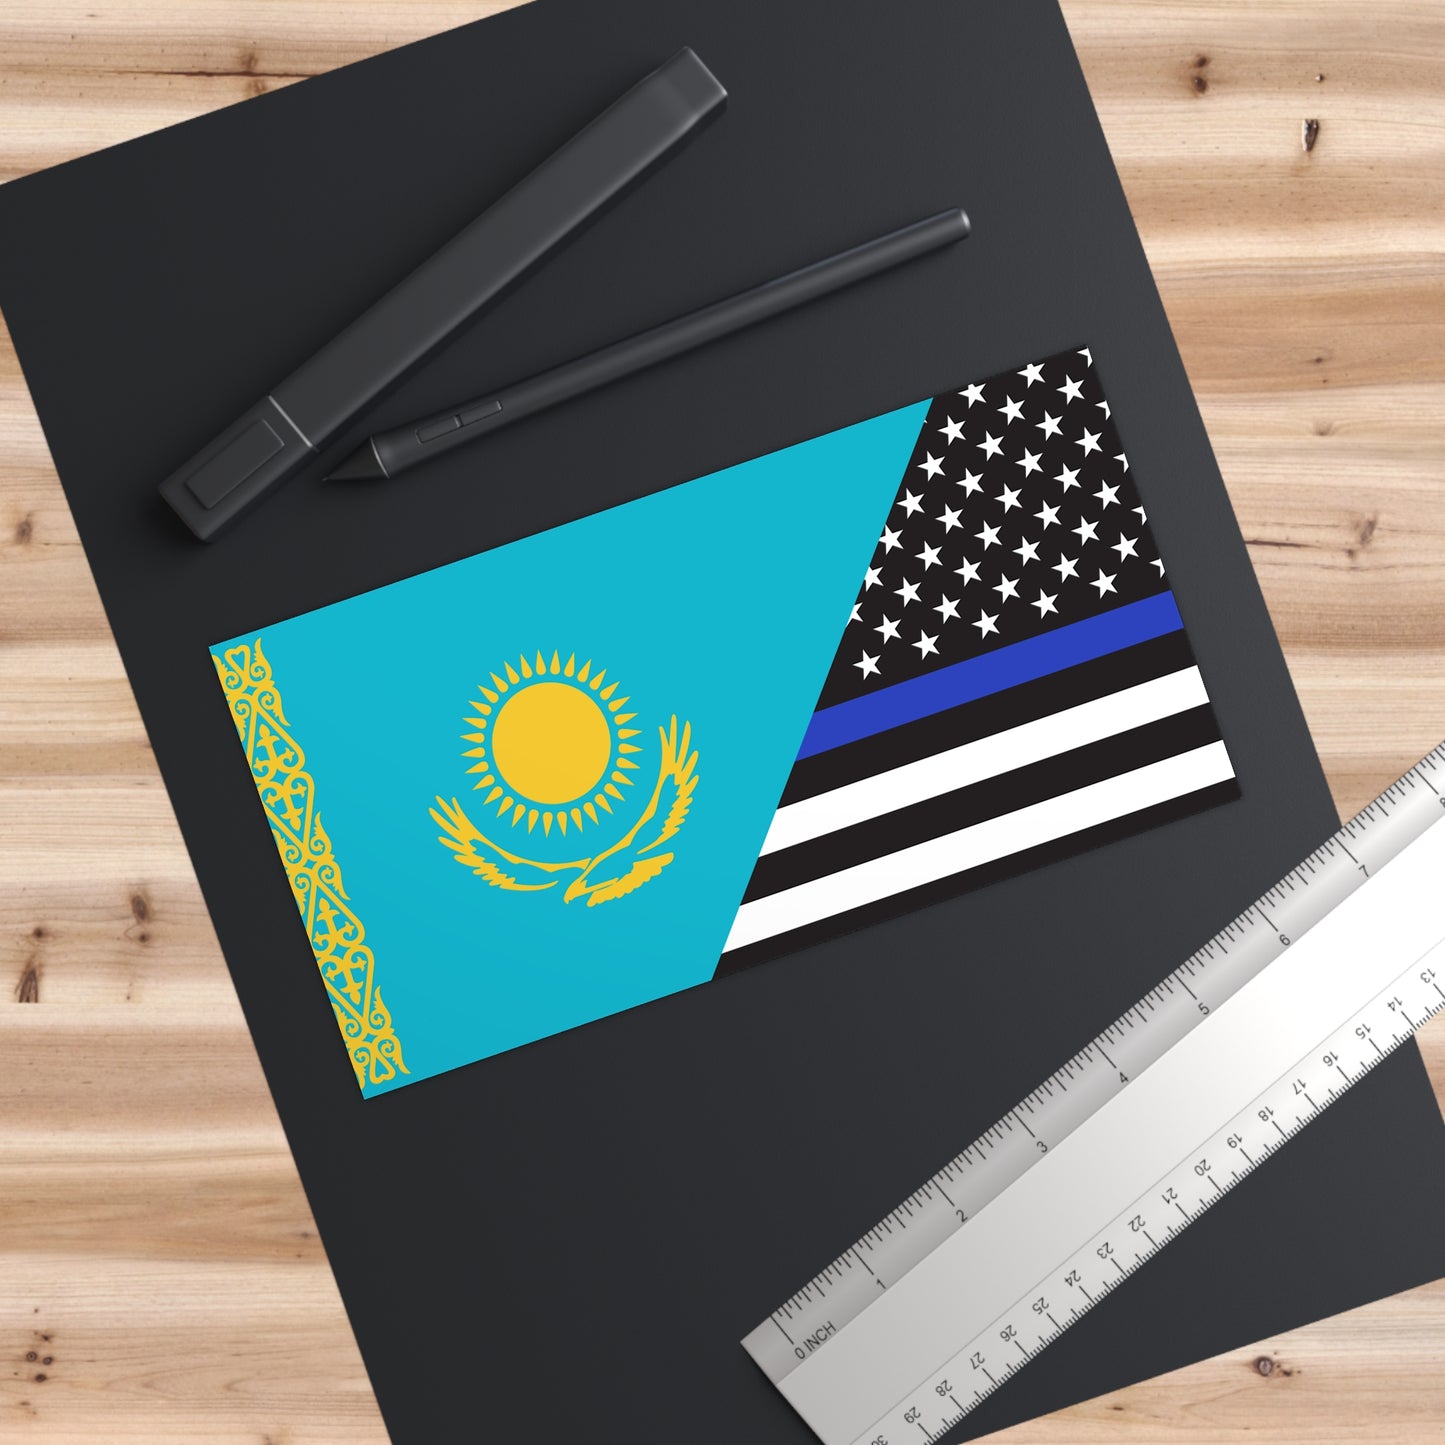 Kazakhs Support US Police Flag Bumper Stickers